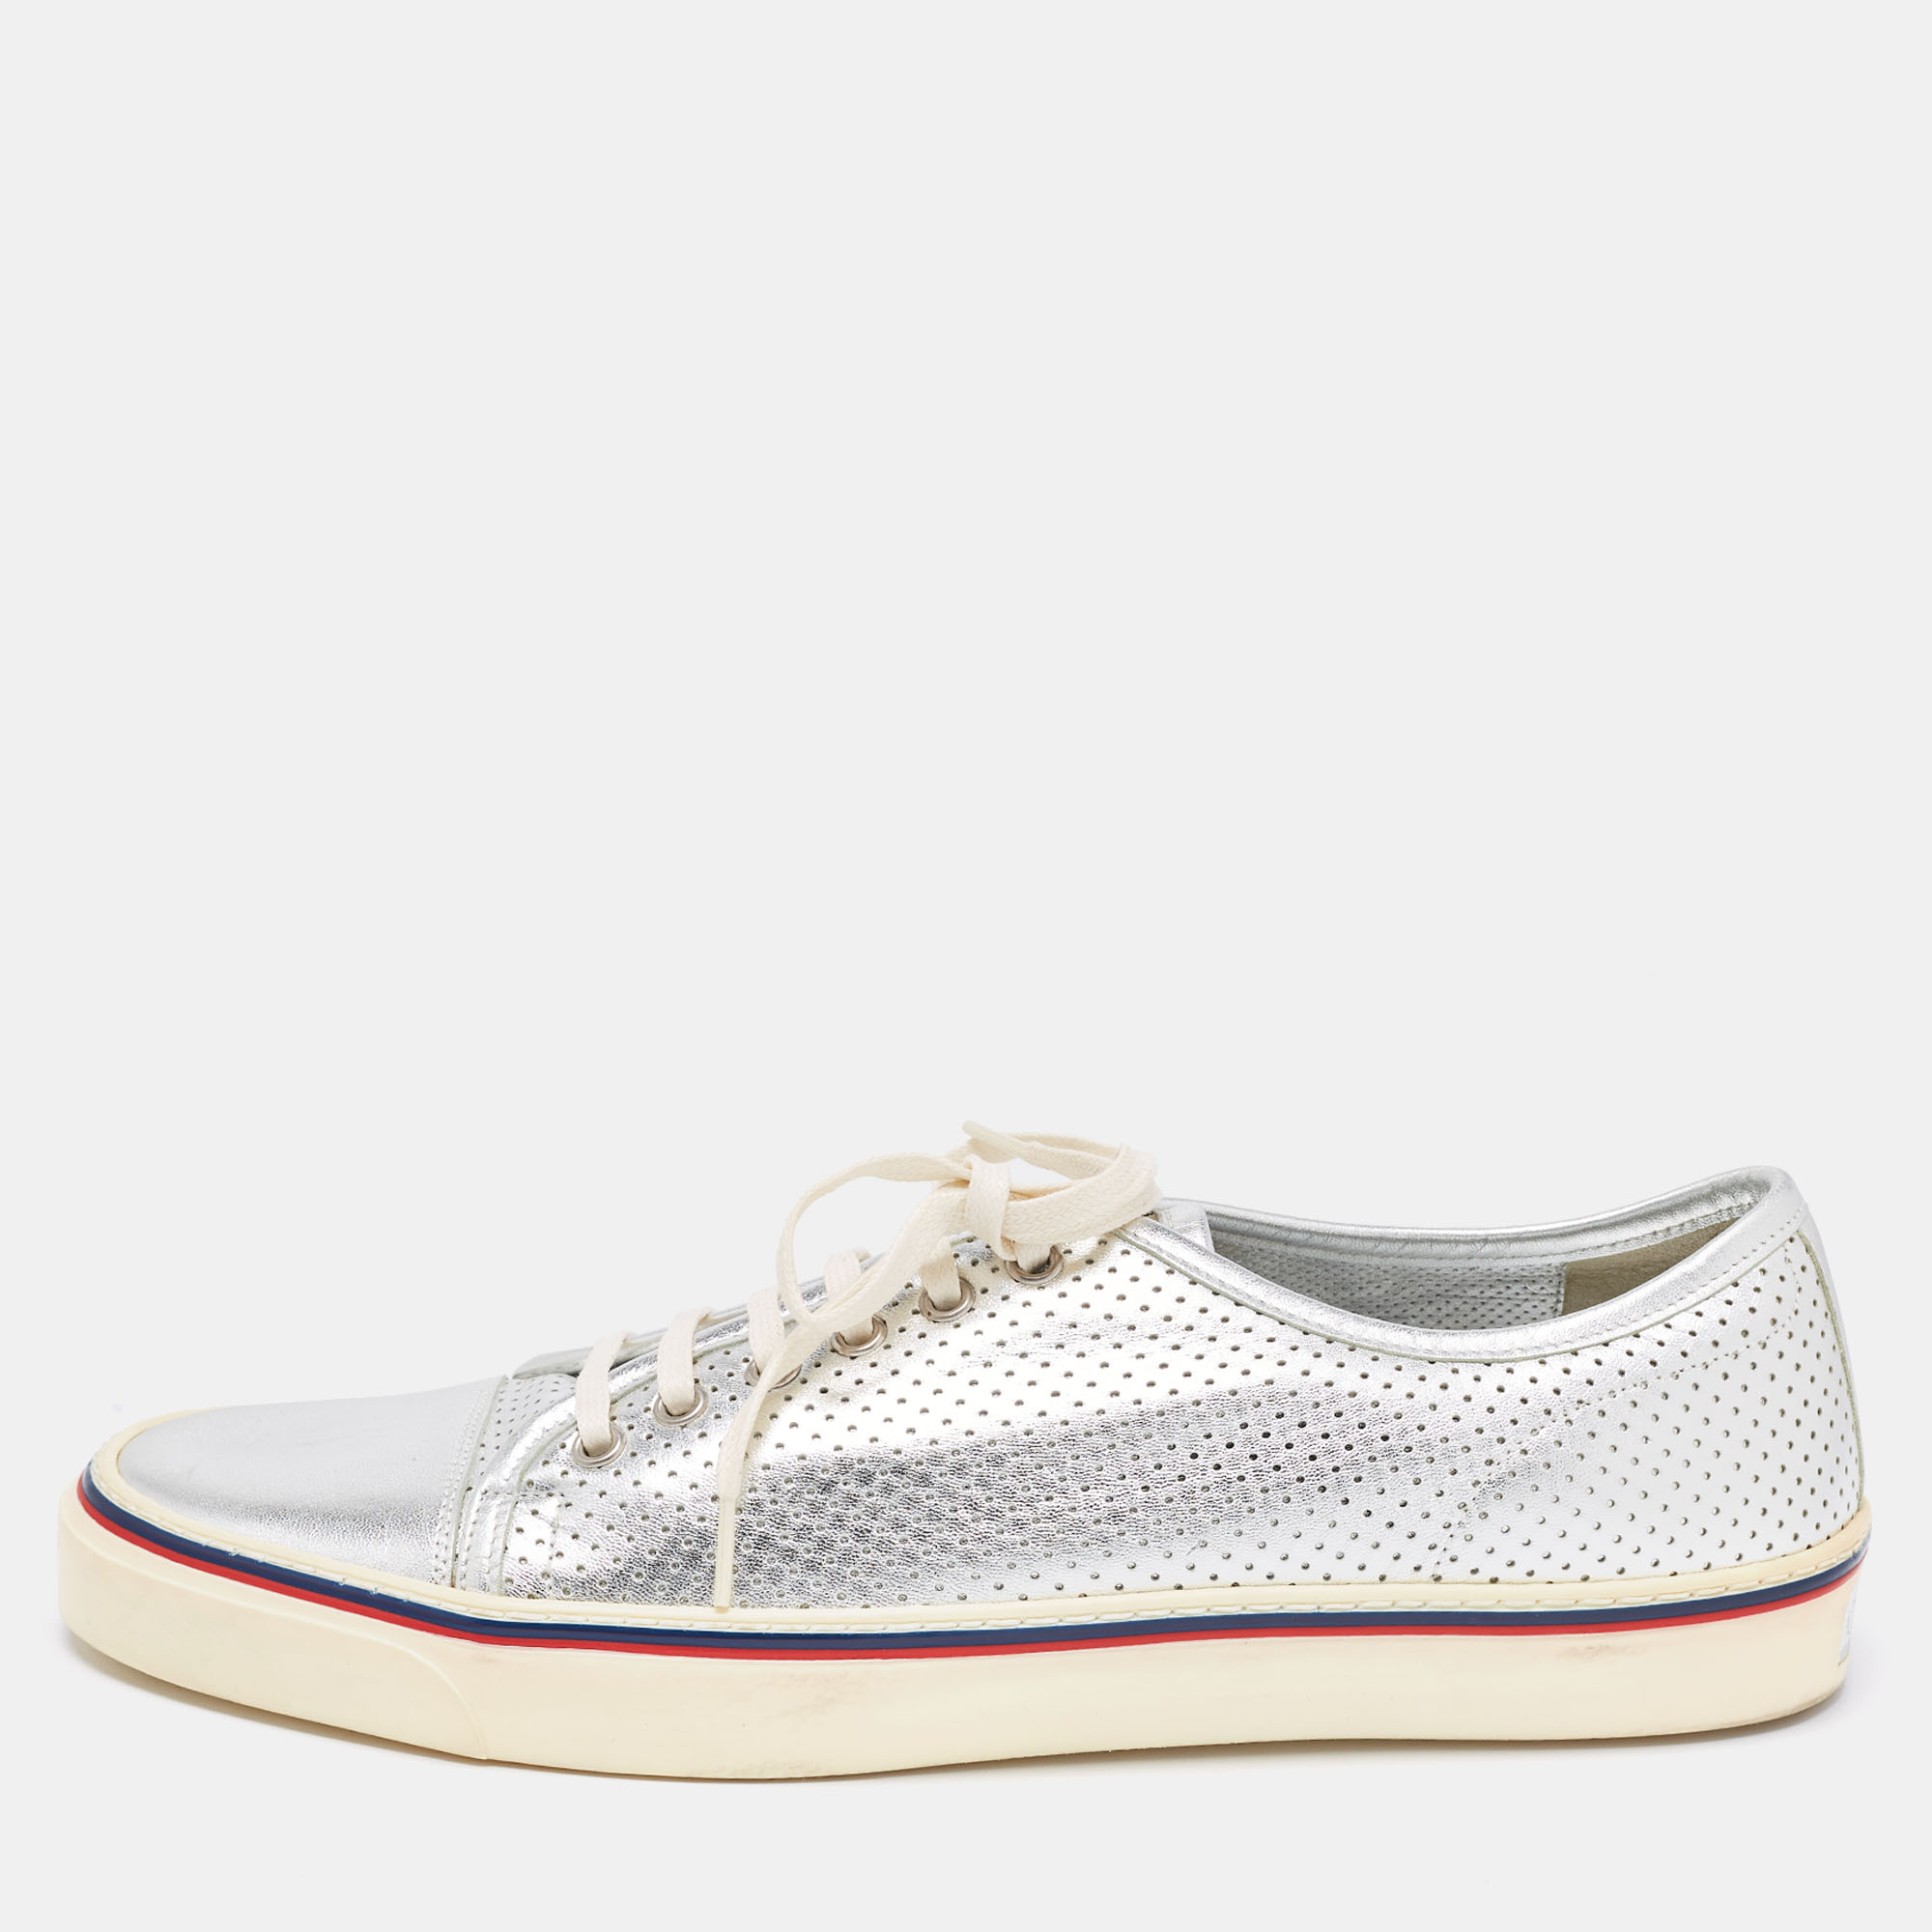 Pre-owned Gucci Silver Perforated Leather Low Top Sneakers Size 44.5